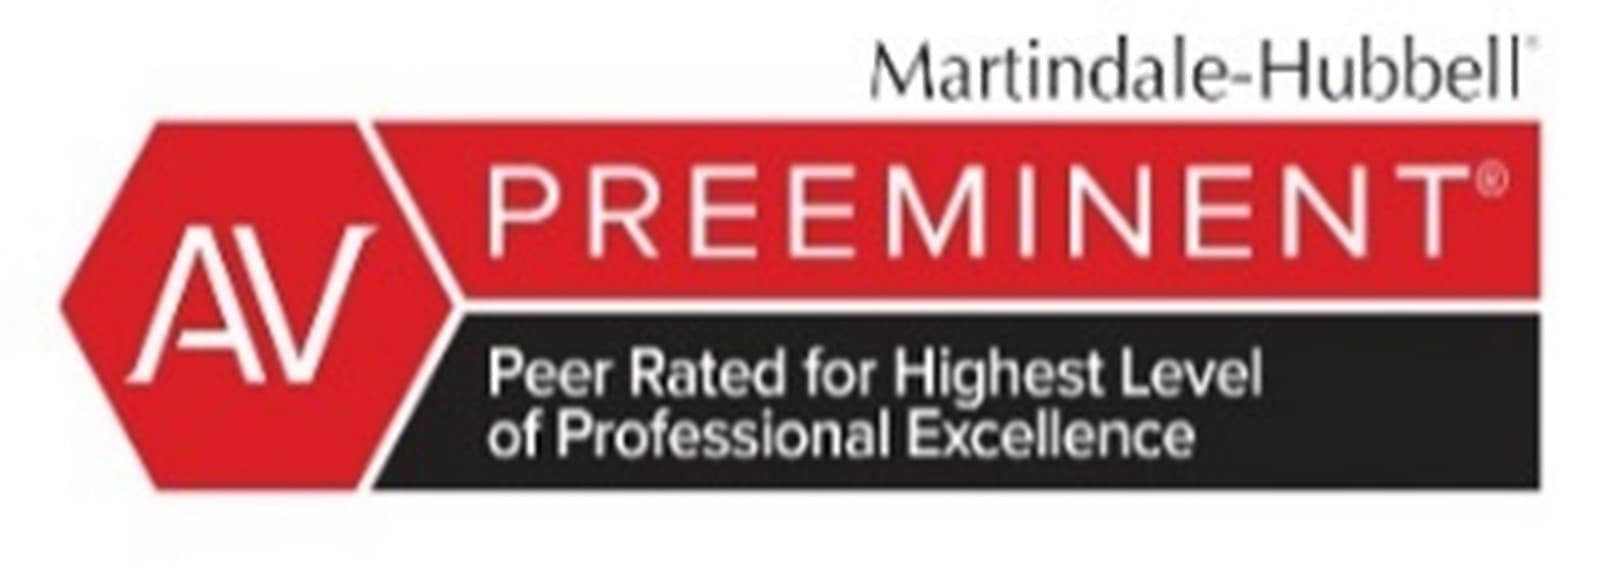 Martindal-Hubbel Preeminent Peer rated for highest level of professional excellence